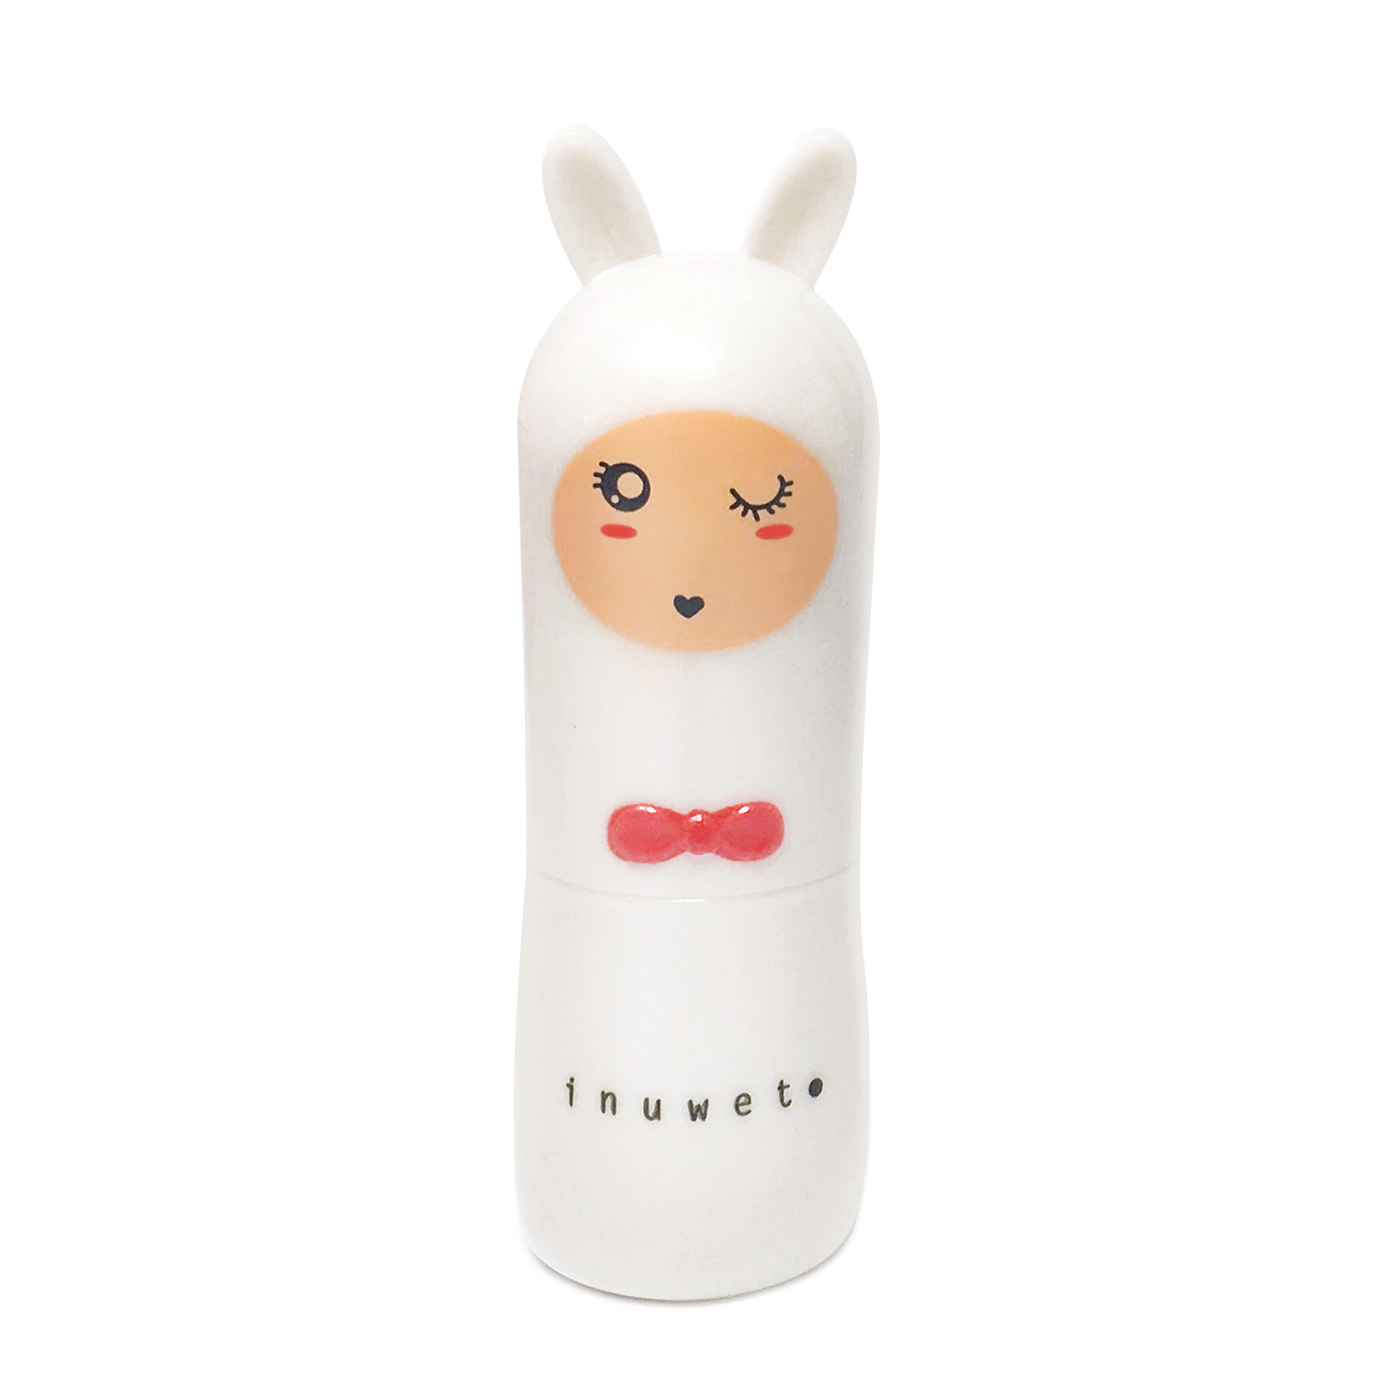  Inuwet Bunny Lipbalm  | Coton Candy